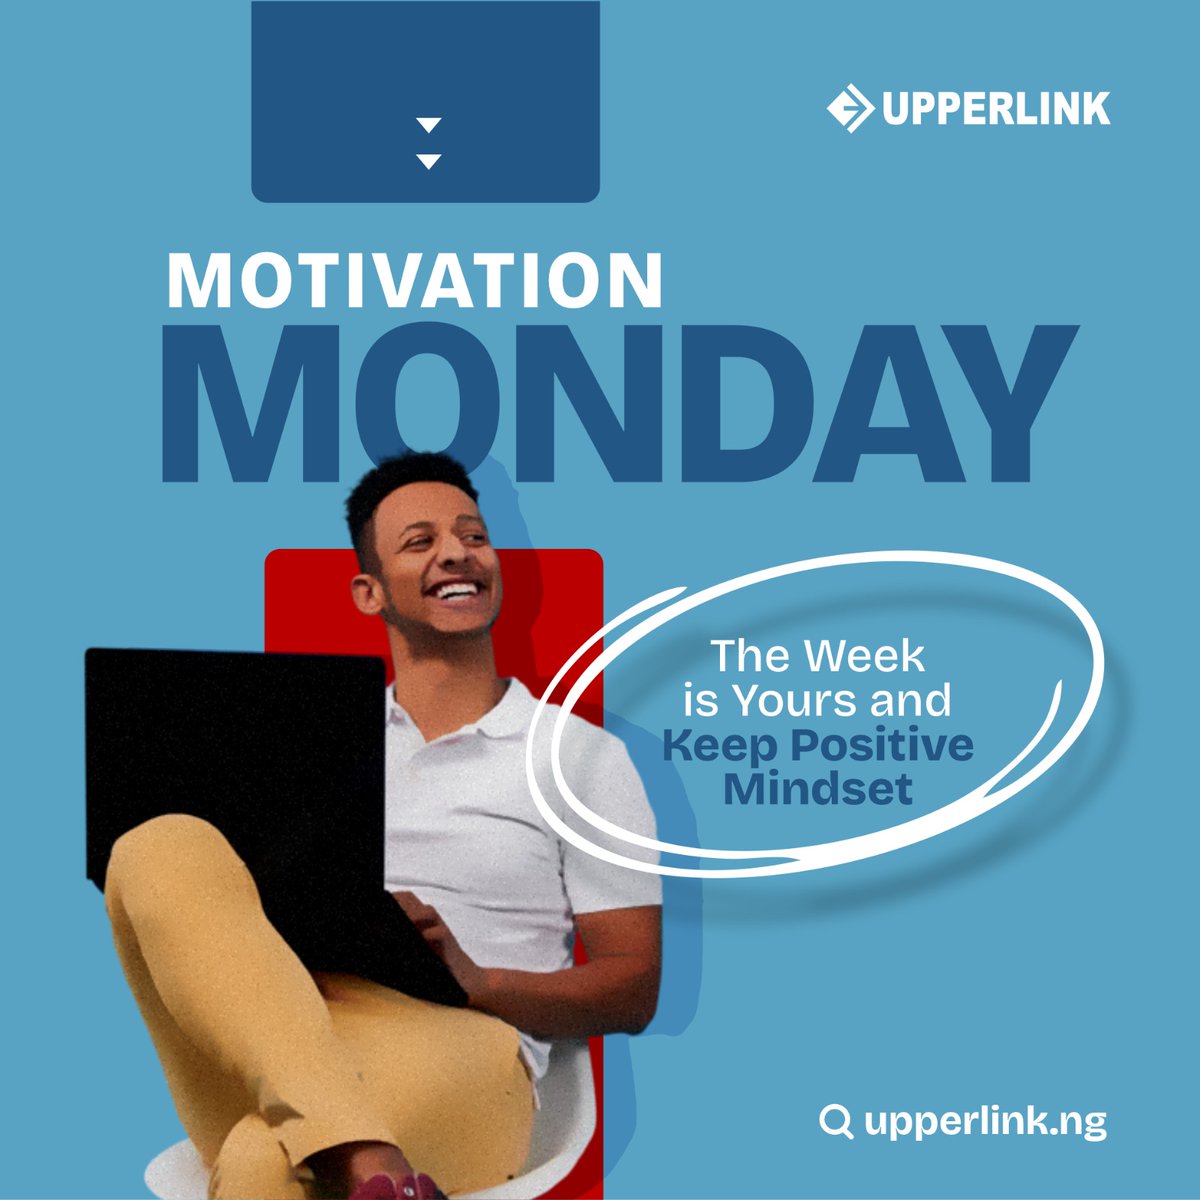 Monday mantra: Rise, shine, and make today so awesome that yesterday gets jealous! 💫

#mondaymotivation #upperlinklimited #domainregistration #explorepage #explore #webhostingservices